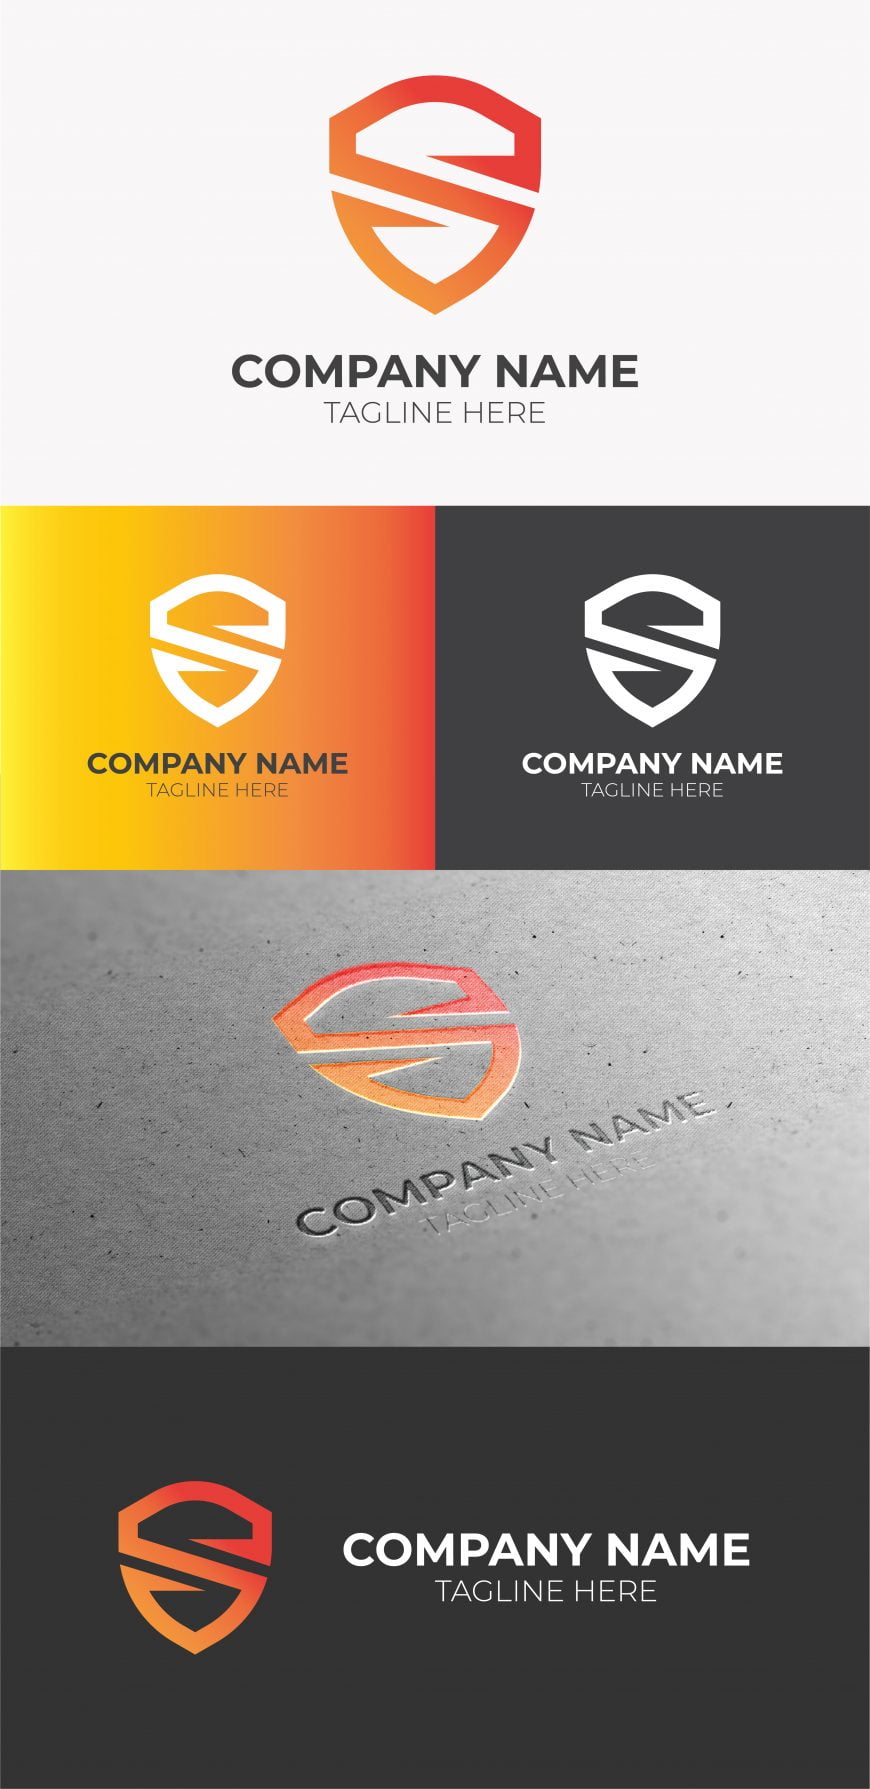 free-security-logo-design-template-scaled